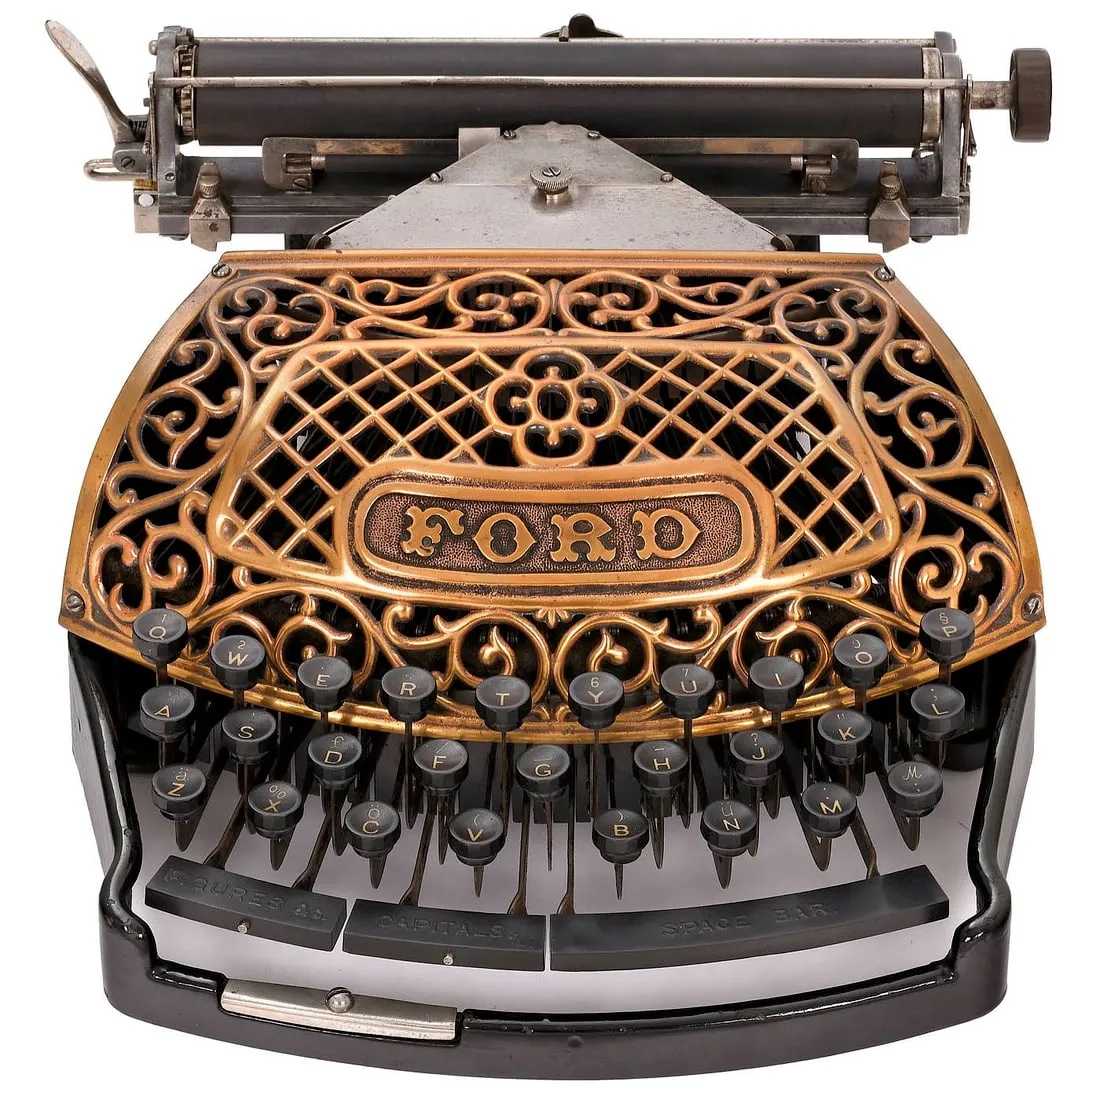 Ford typewriter, which sold for €29,000 ($31,395, or $38,870 with buyer’s premium) at Breker.